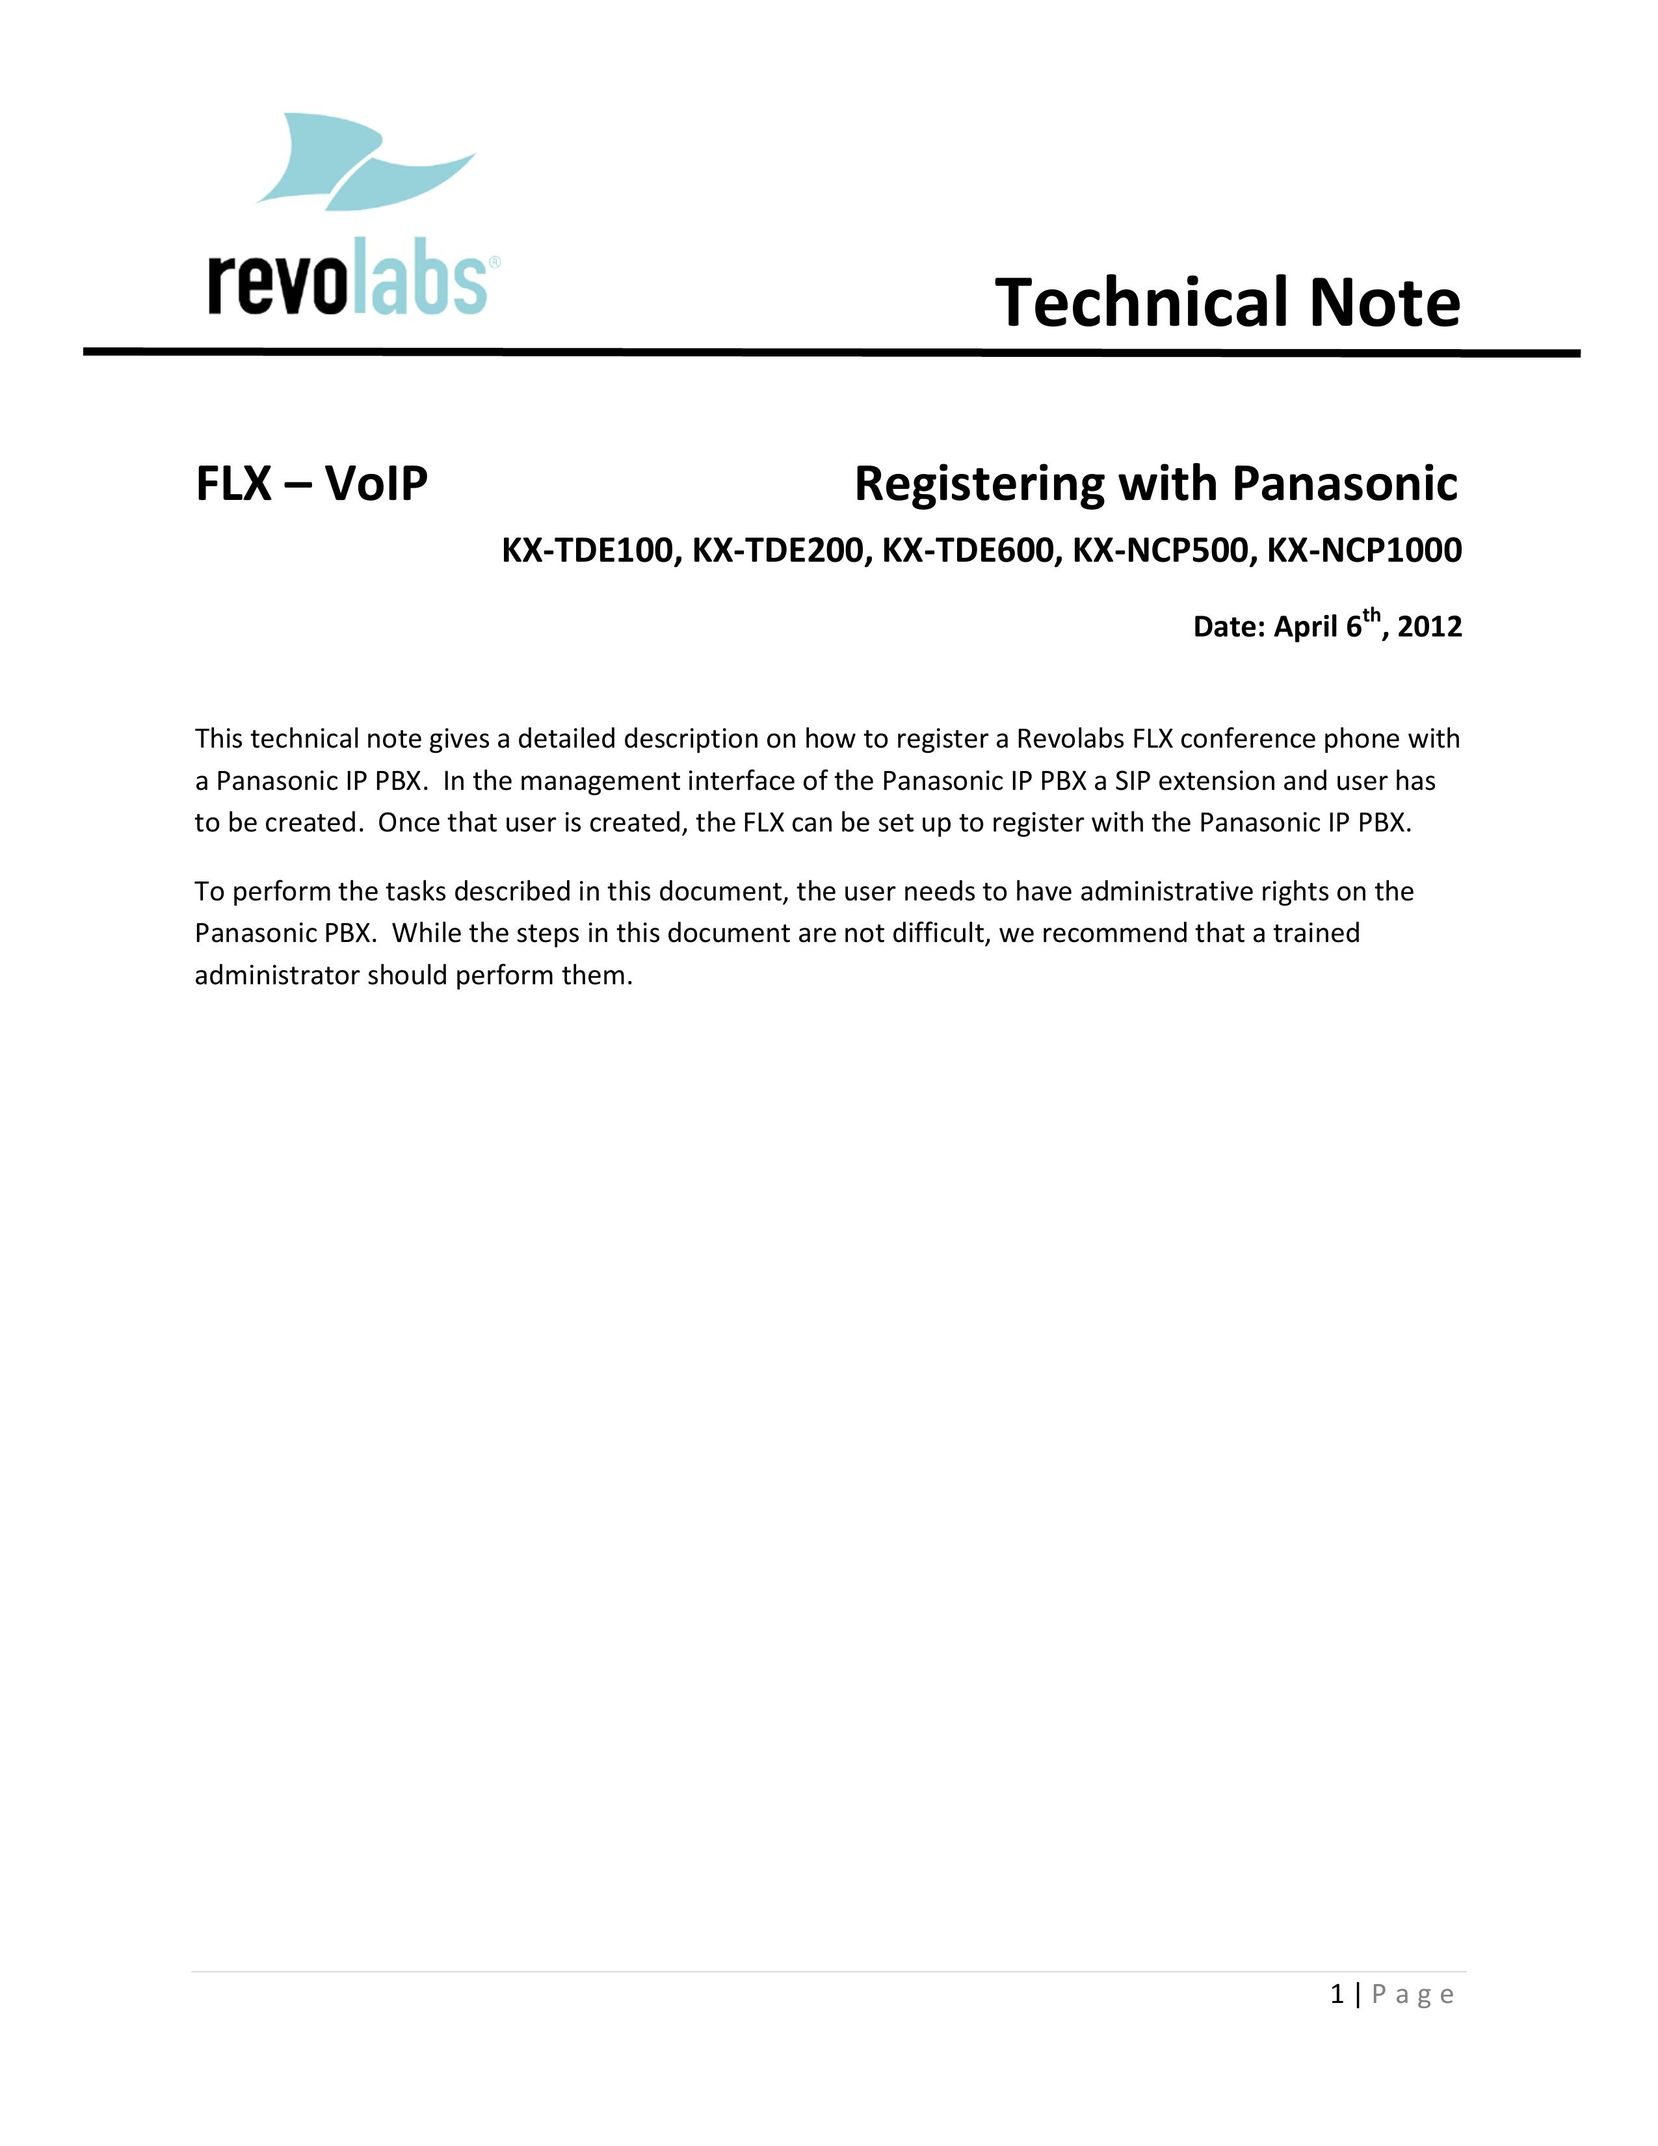 Revolabs KX-NCP500 Amplified Phone User Manual